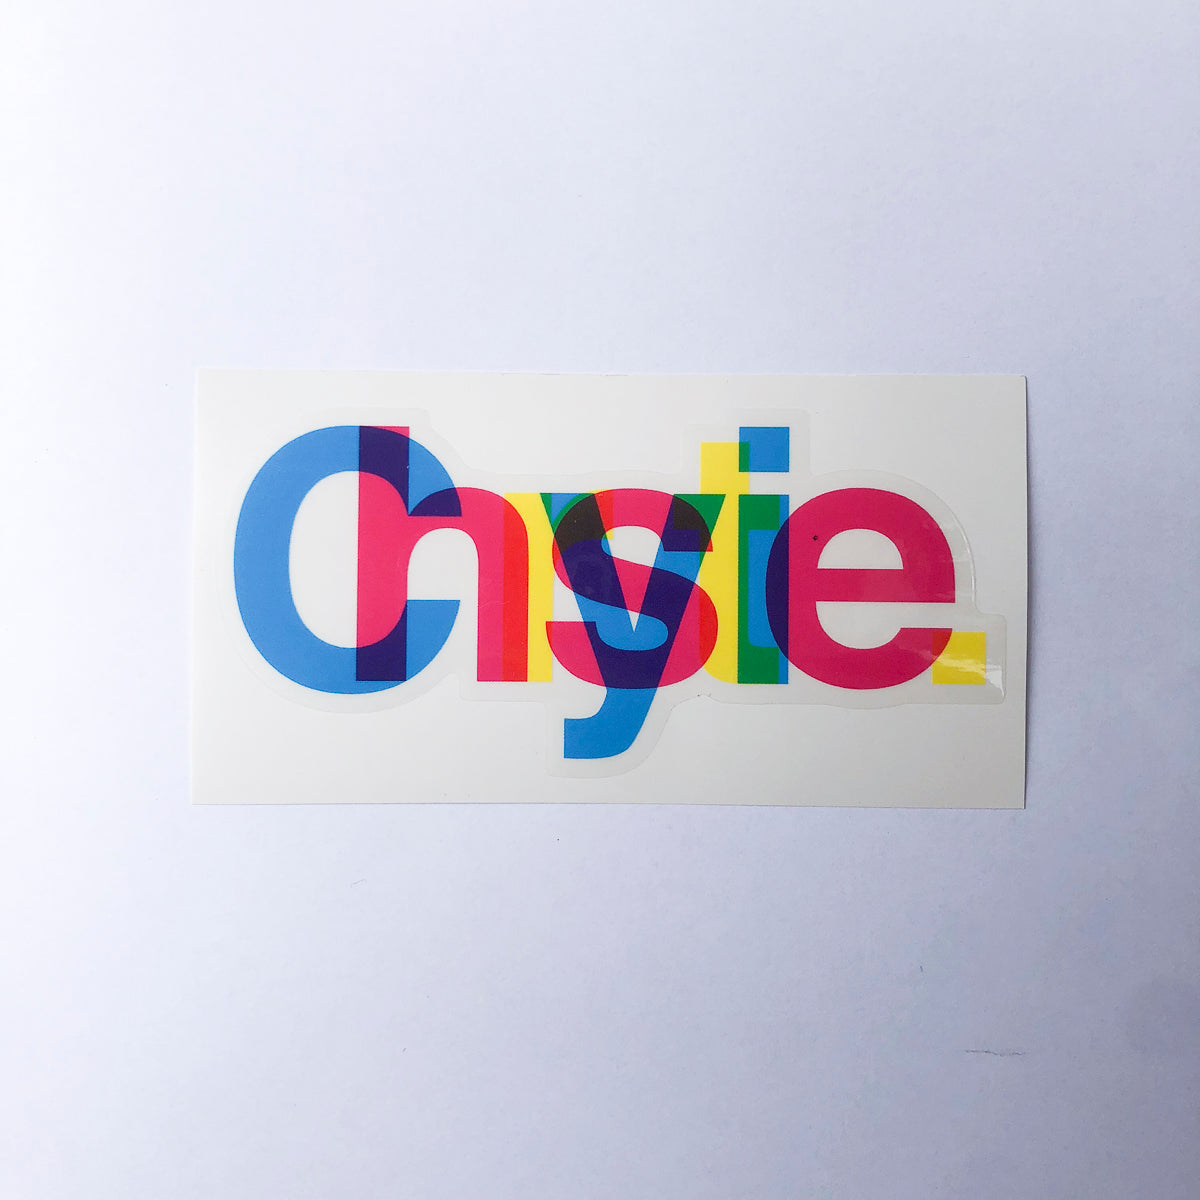 Load image into Gallery viewer, Chrystie sticker pack